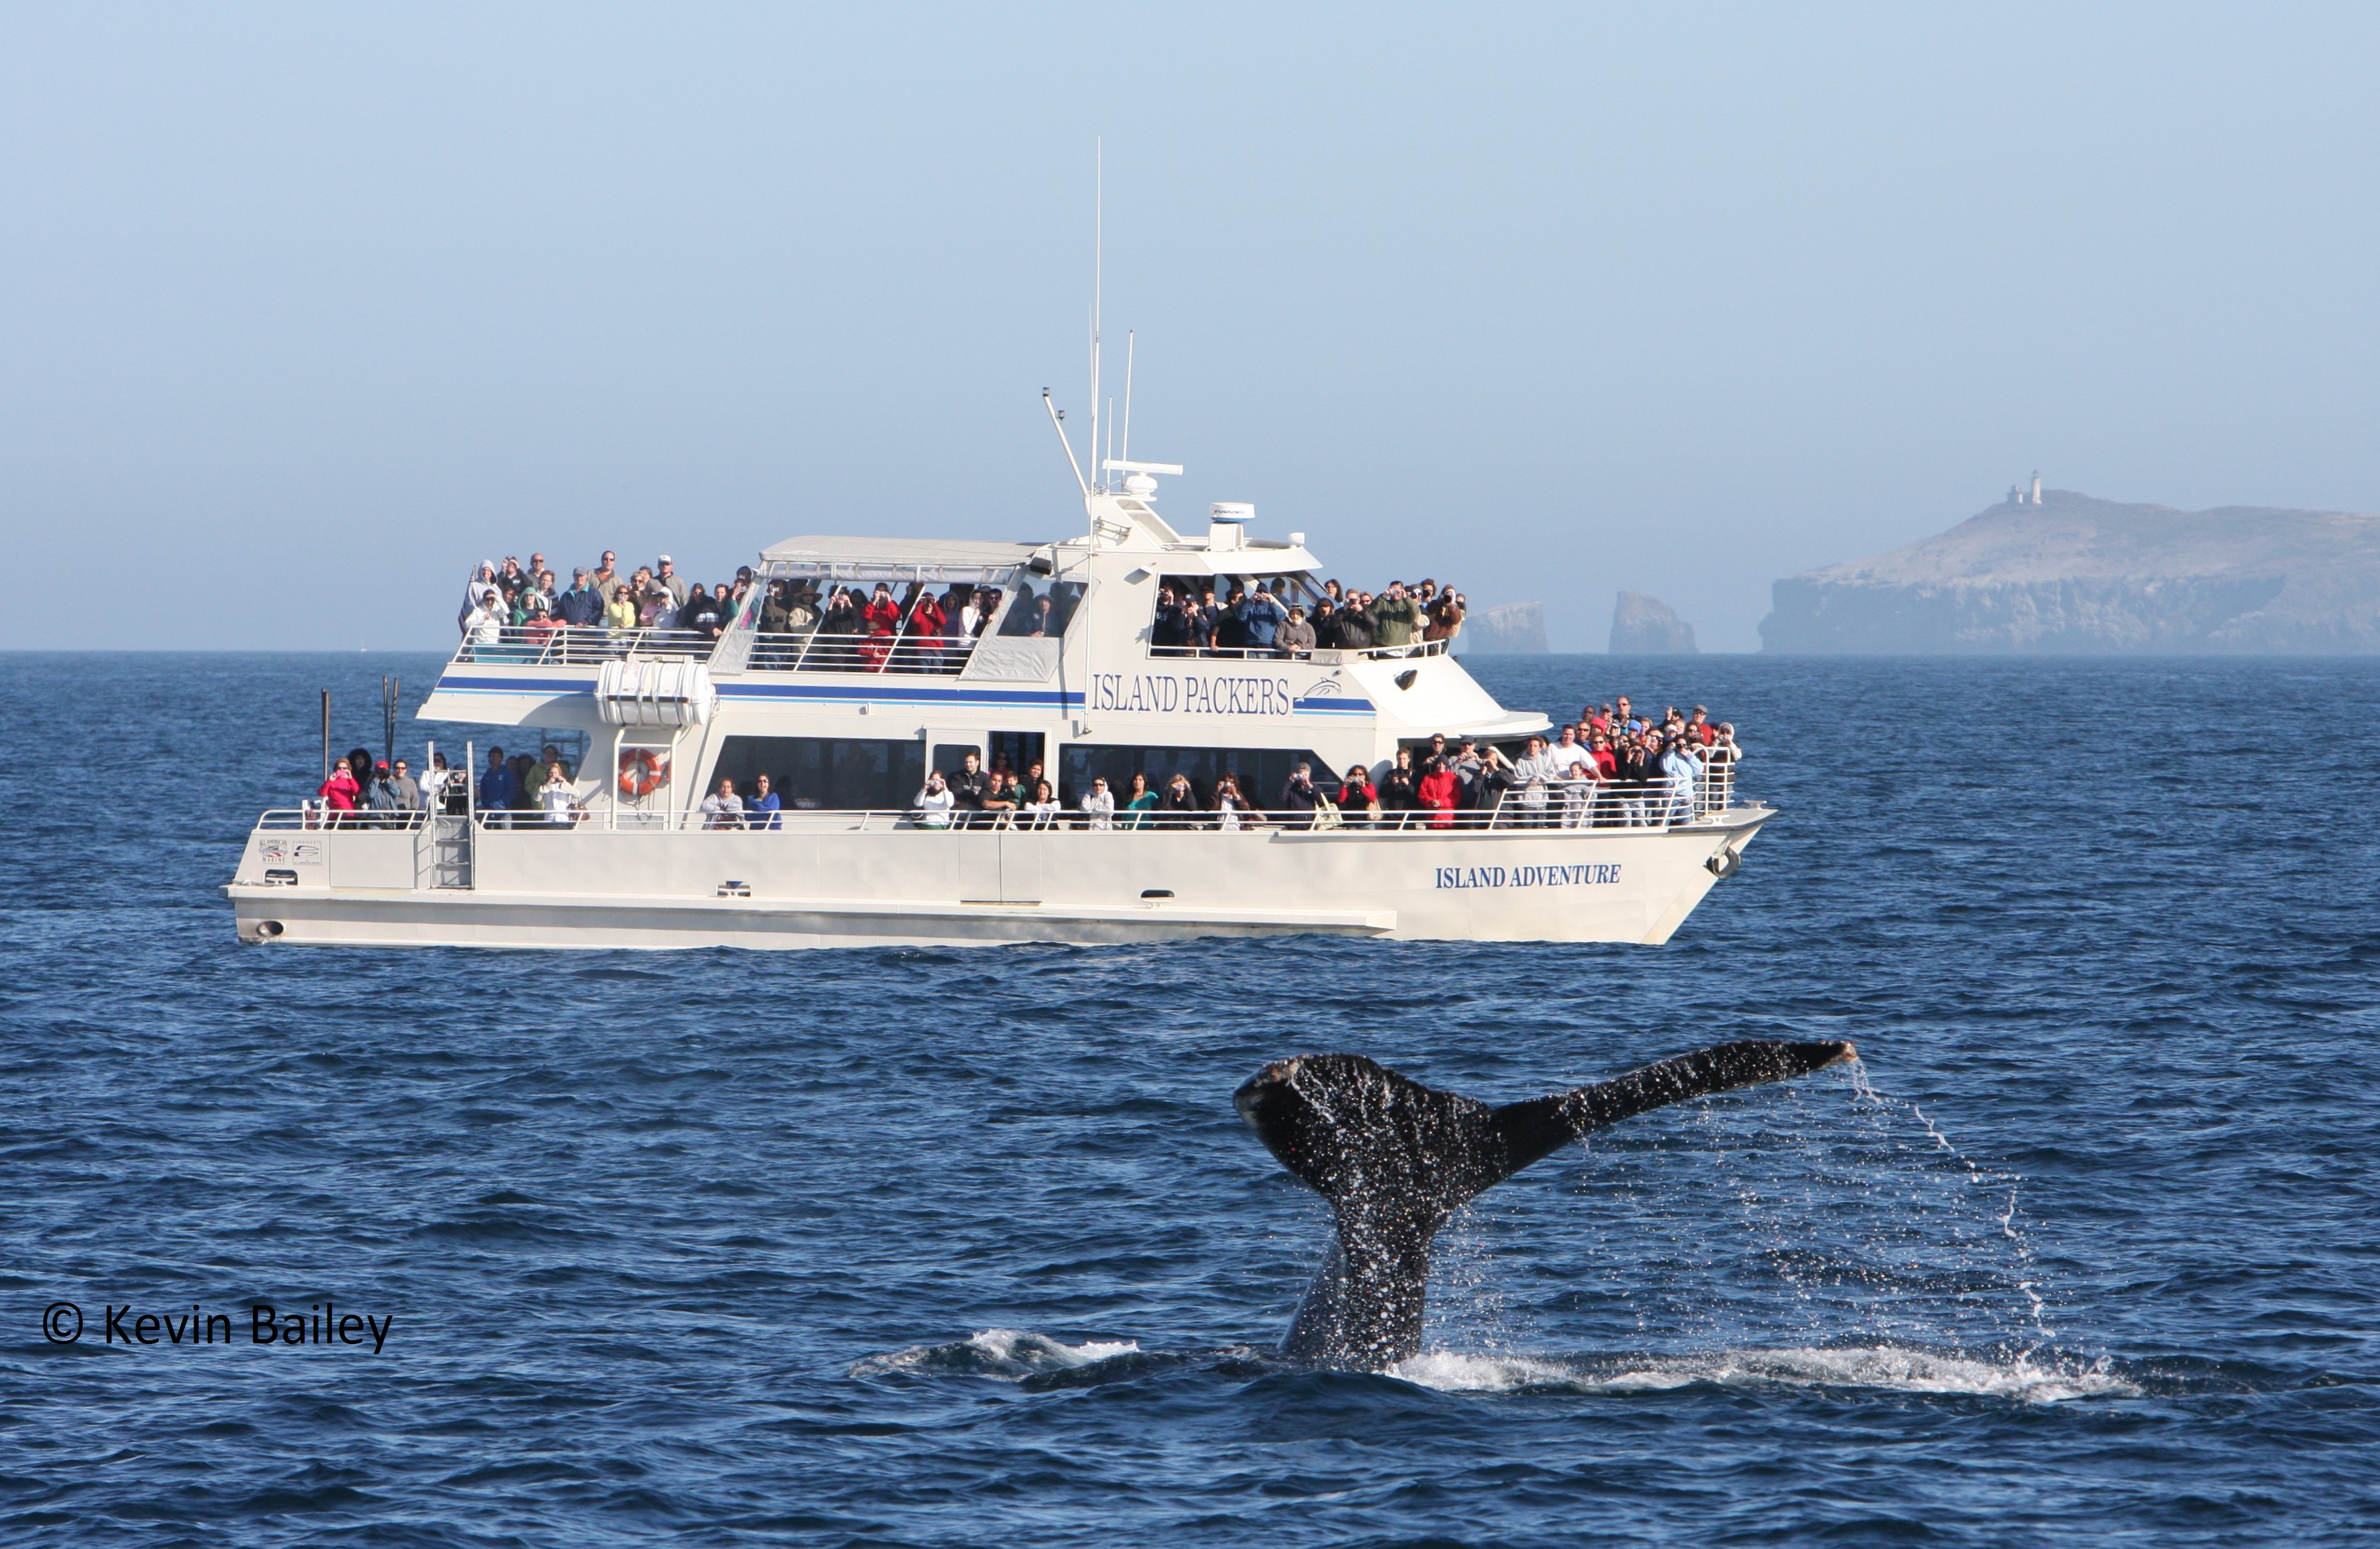 A whale tail pokes out of the ocean water in front of a white boat filled with passengers. The boat reads "Island Packers" and "Island Adventure."